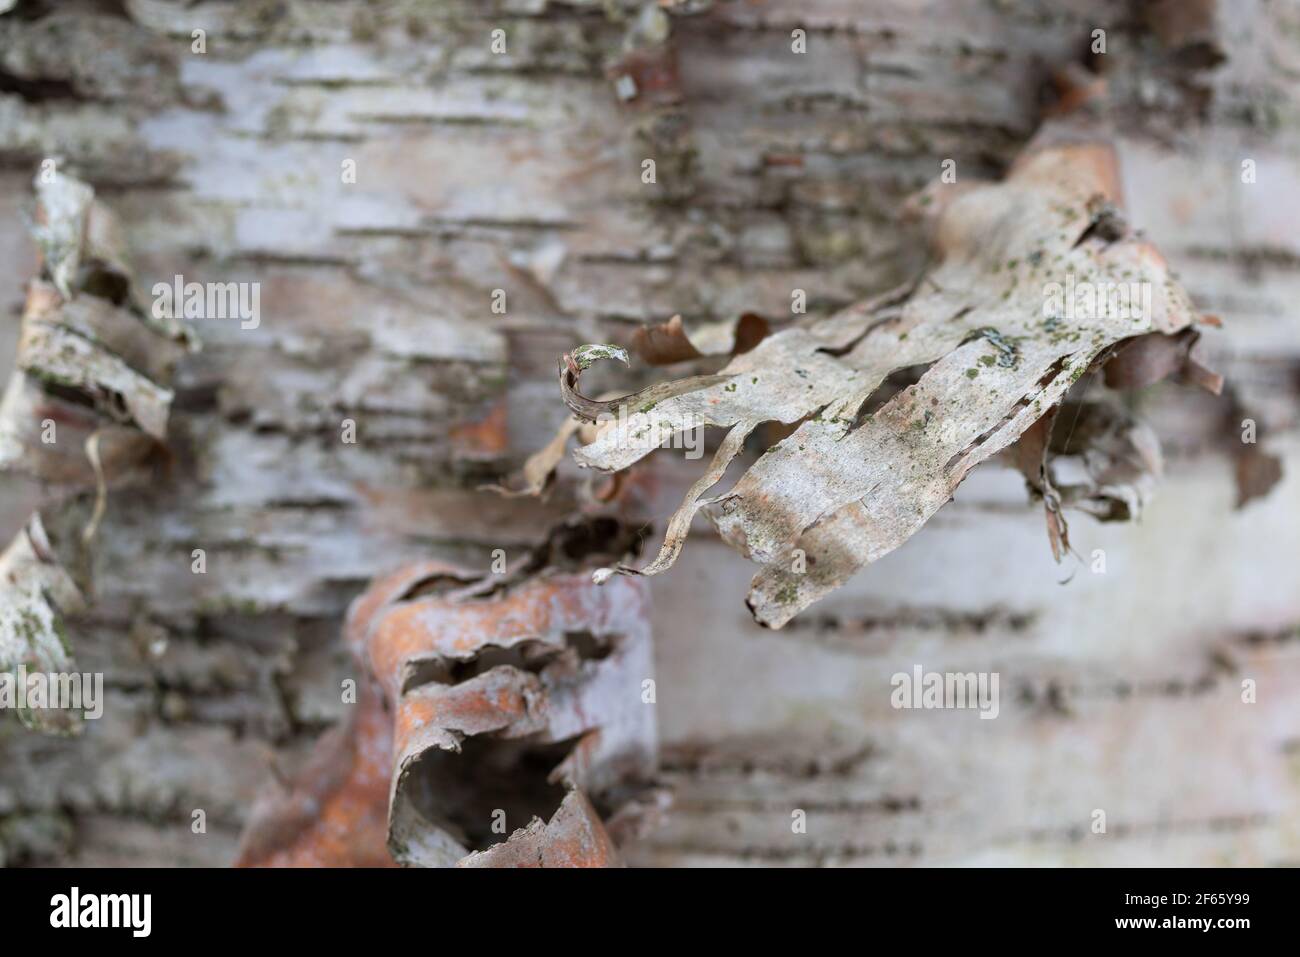 Close view of a long piece of bark shedding from a white birch tree. Stock Photo